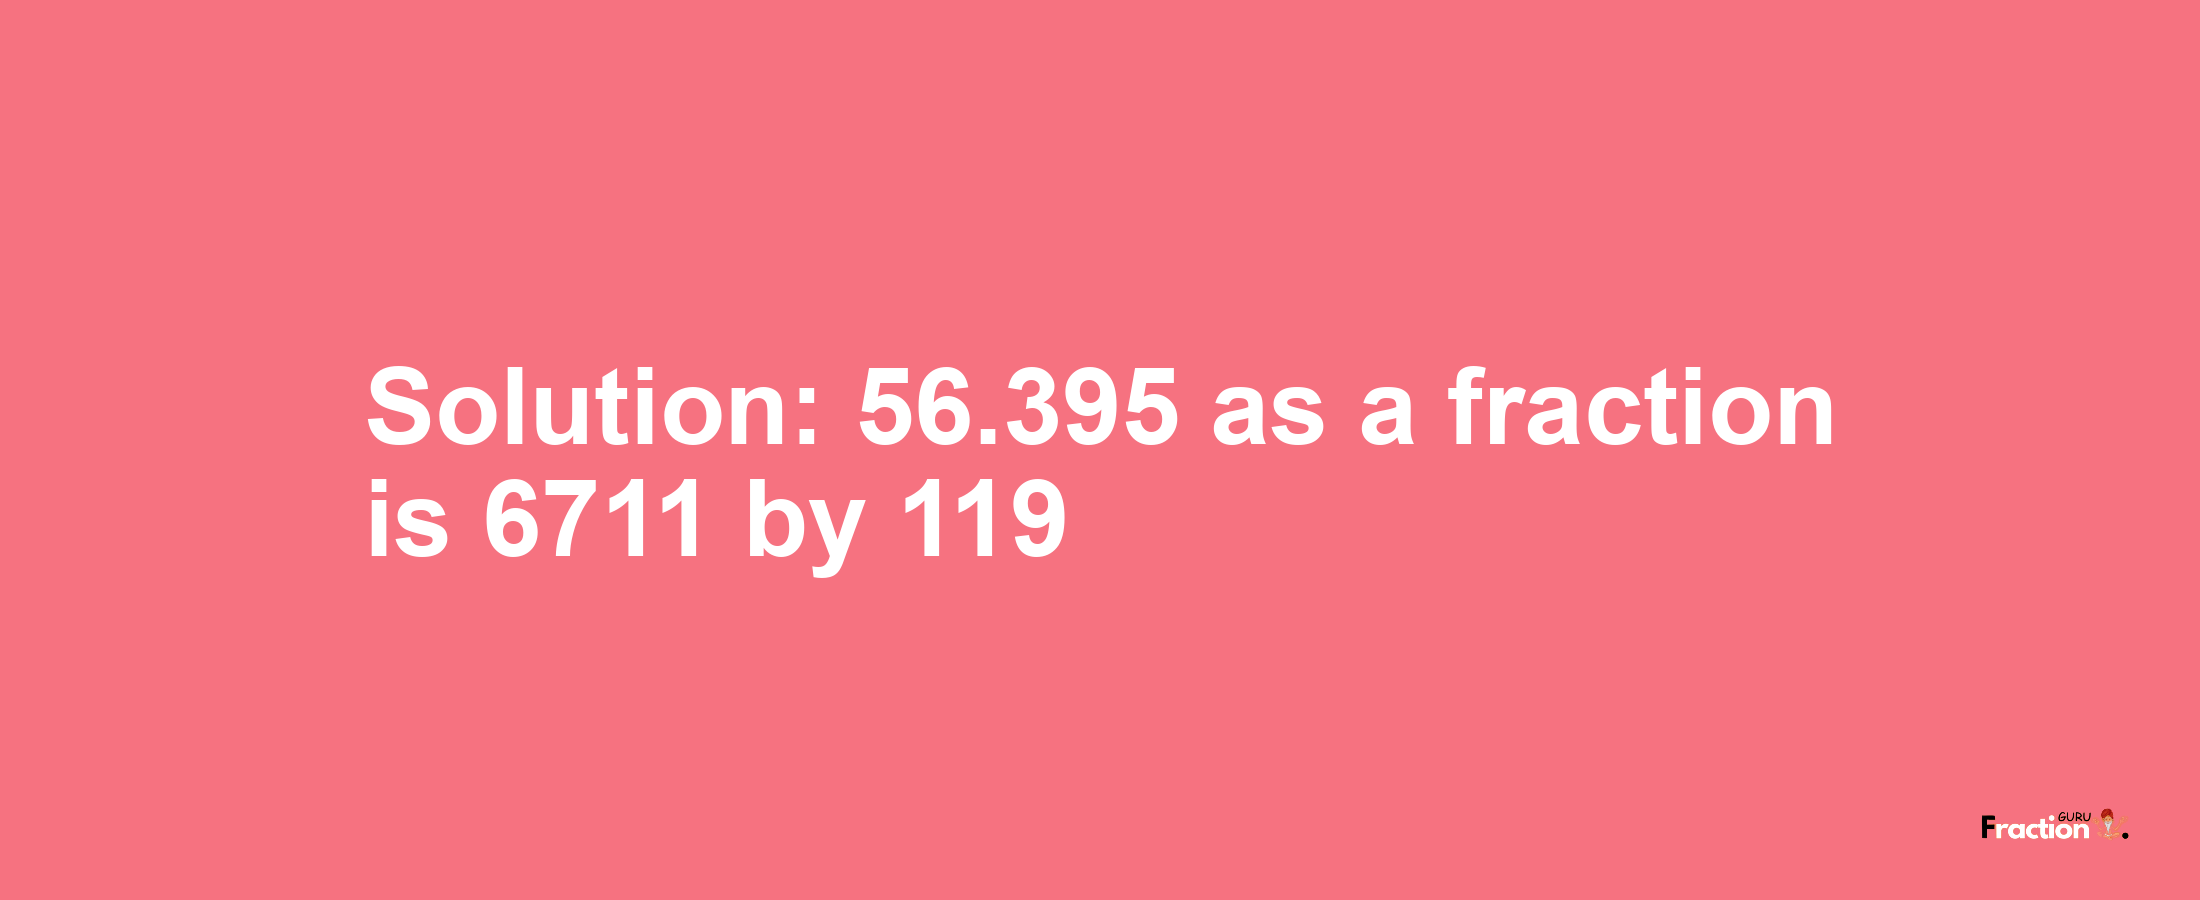 Solution:56.395 as a fraction is 6711/119